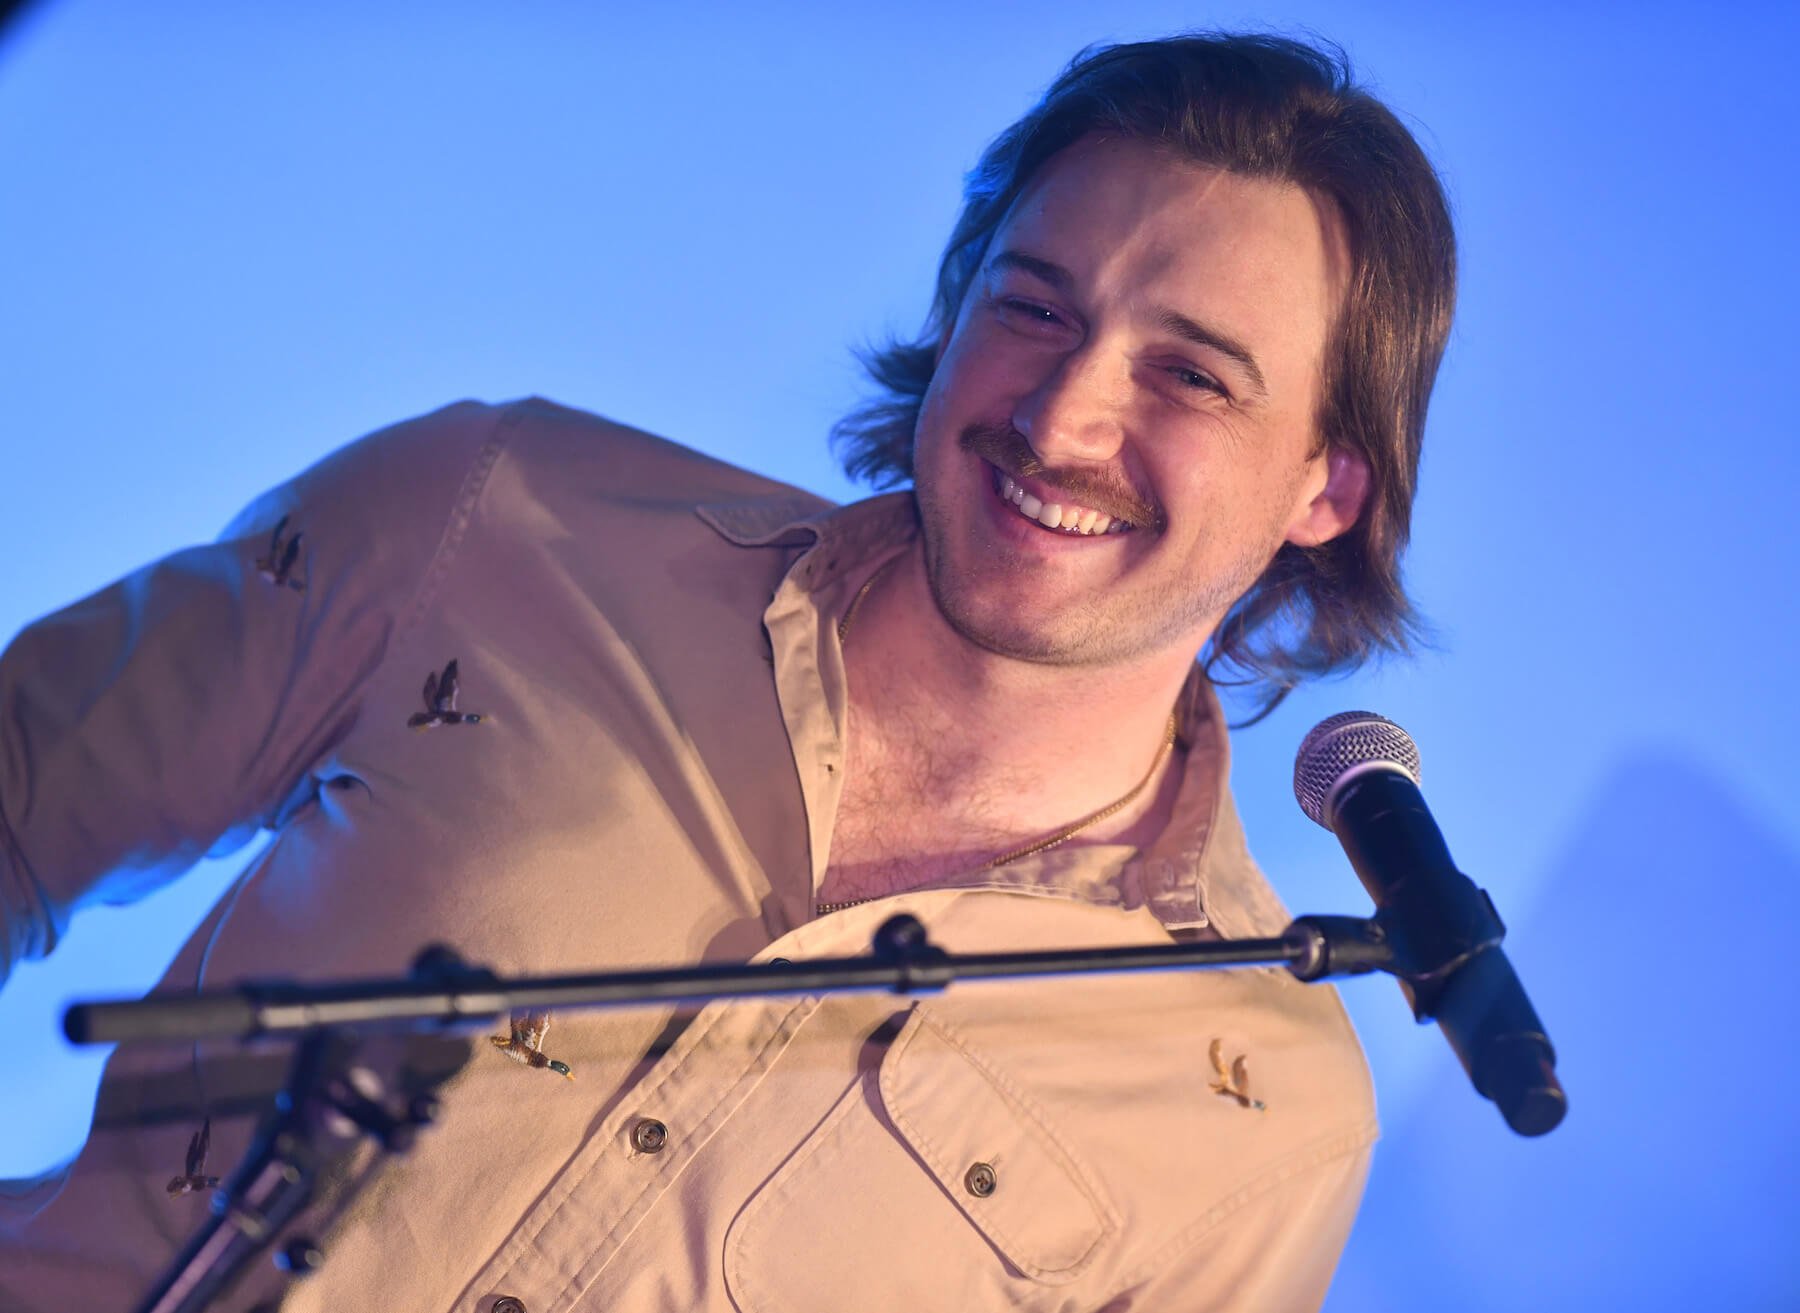 Morgan Wallen smiling on stage with a microphone in front of his face